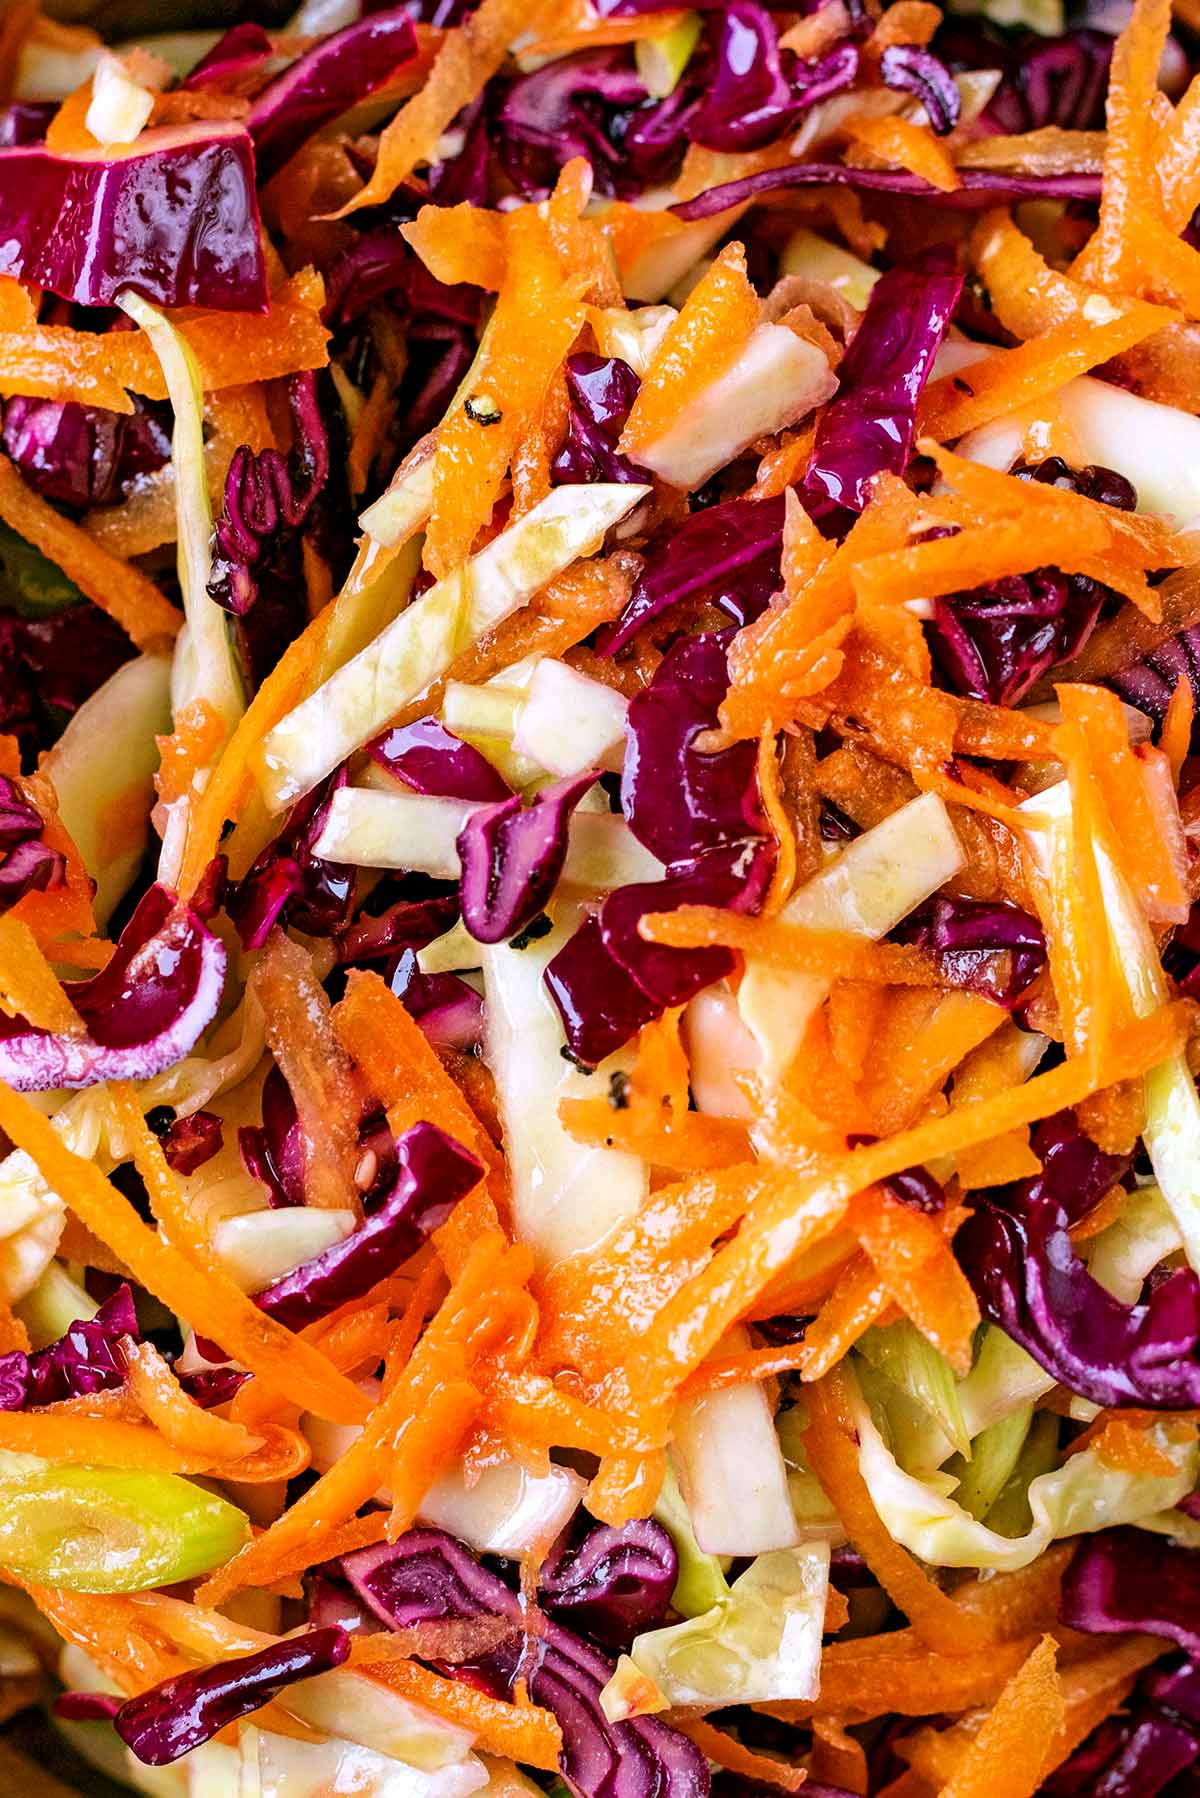 Shredded carrot and cabbage in a dressing.